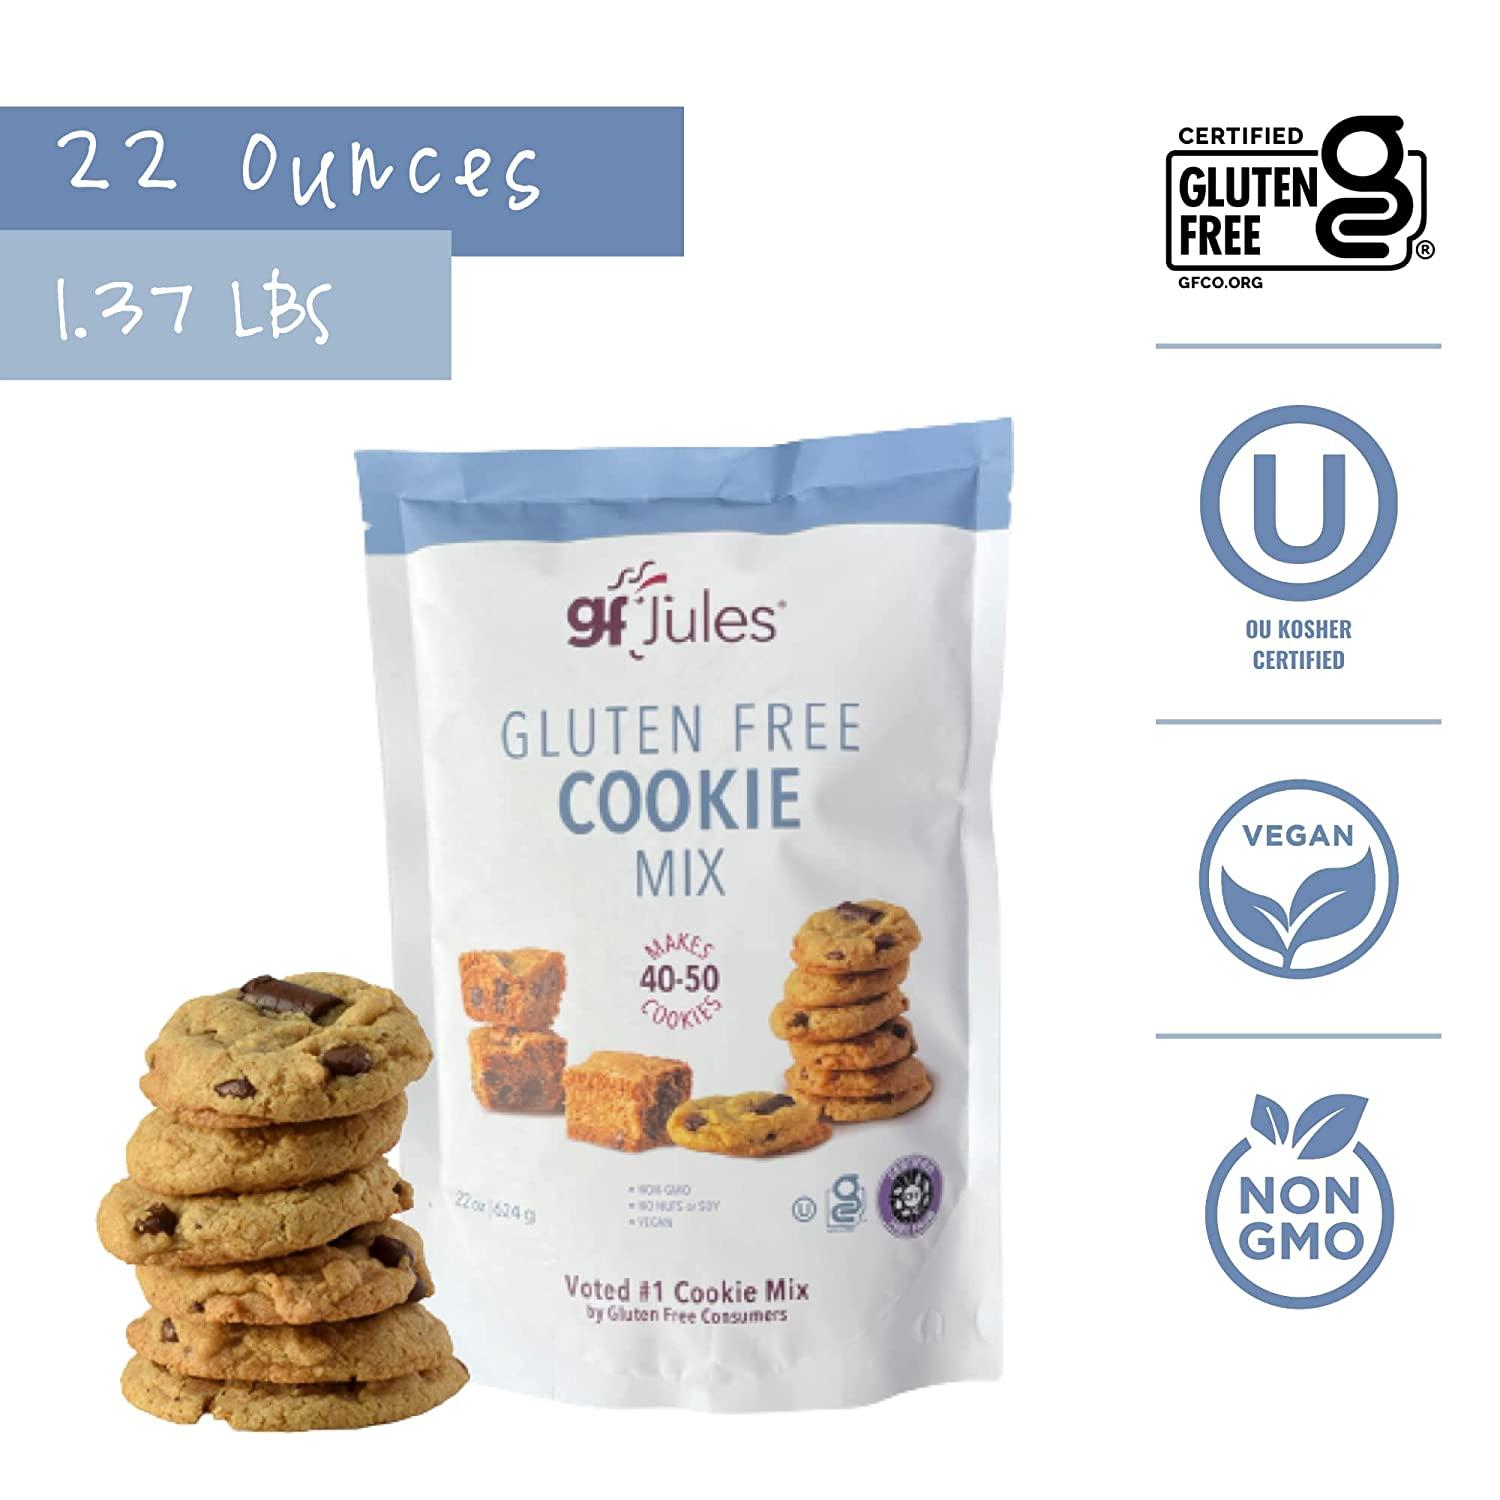 gfJules Gluten Free Muffin Mix - voted #1 by gluten free consumers!